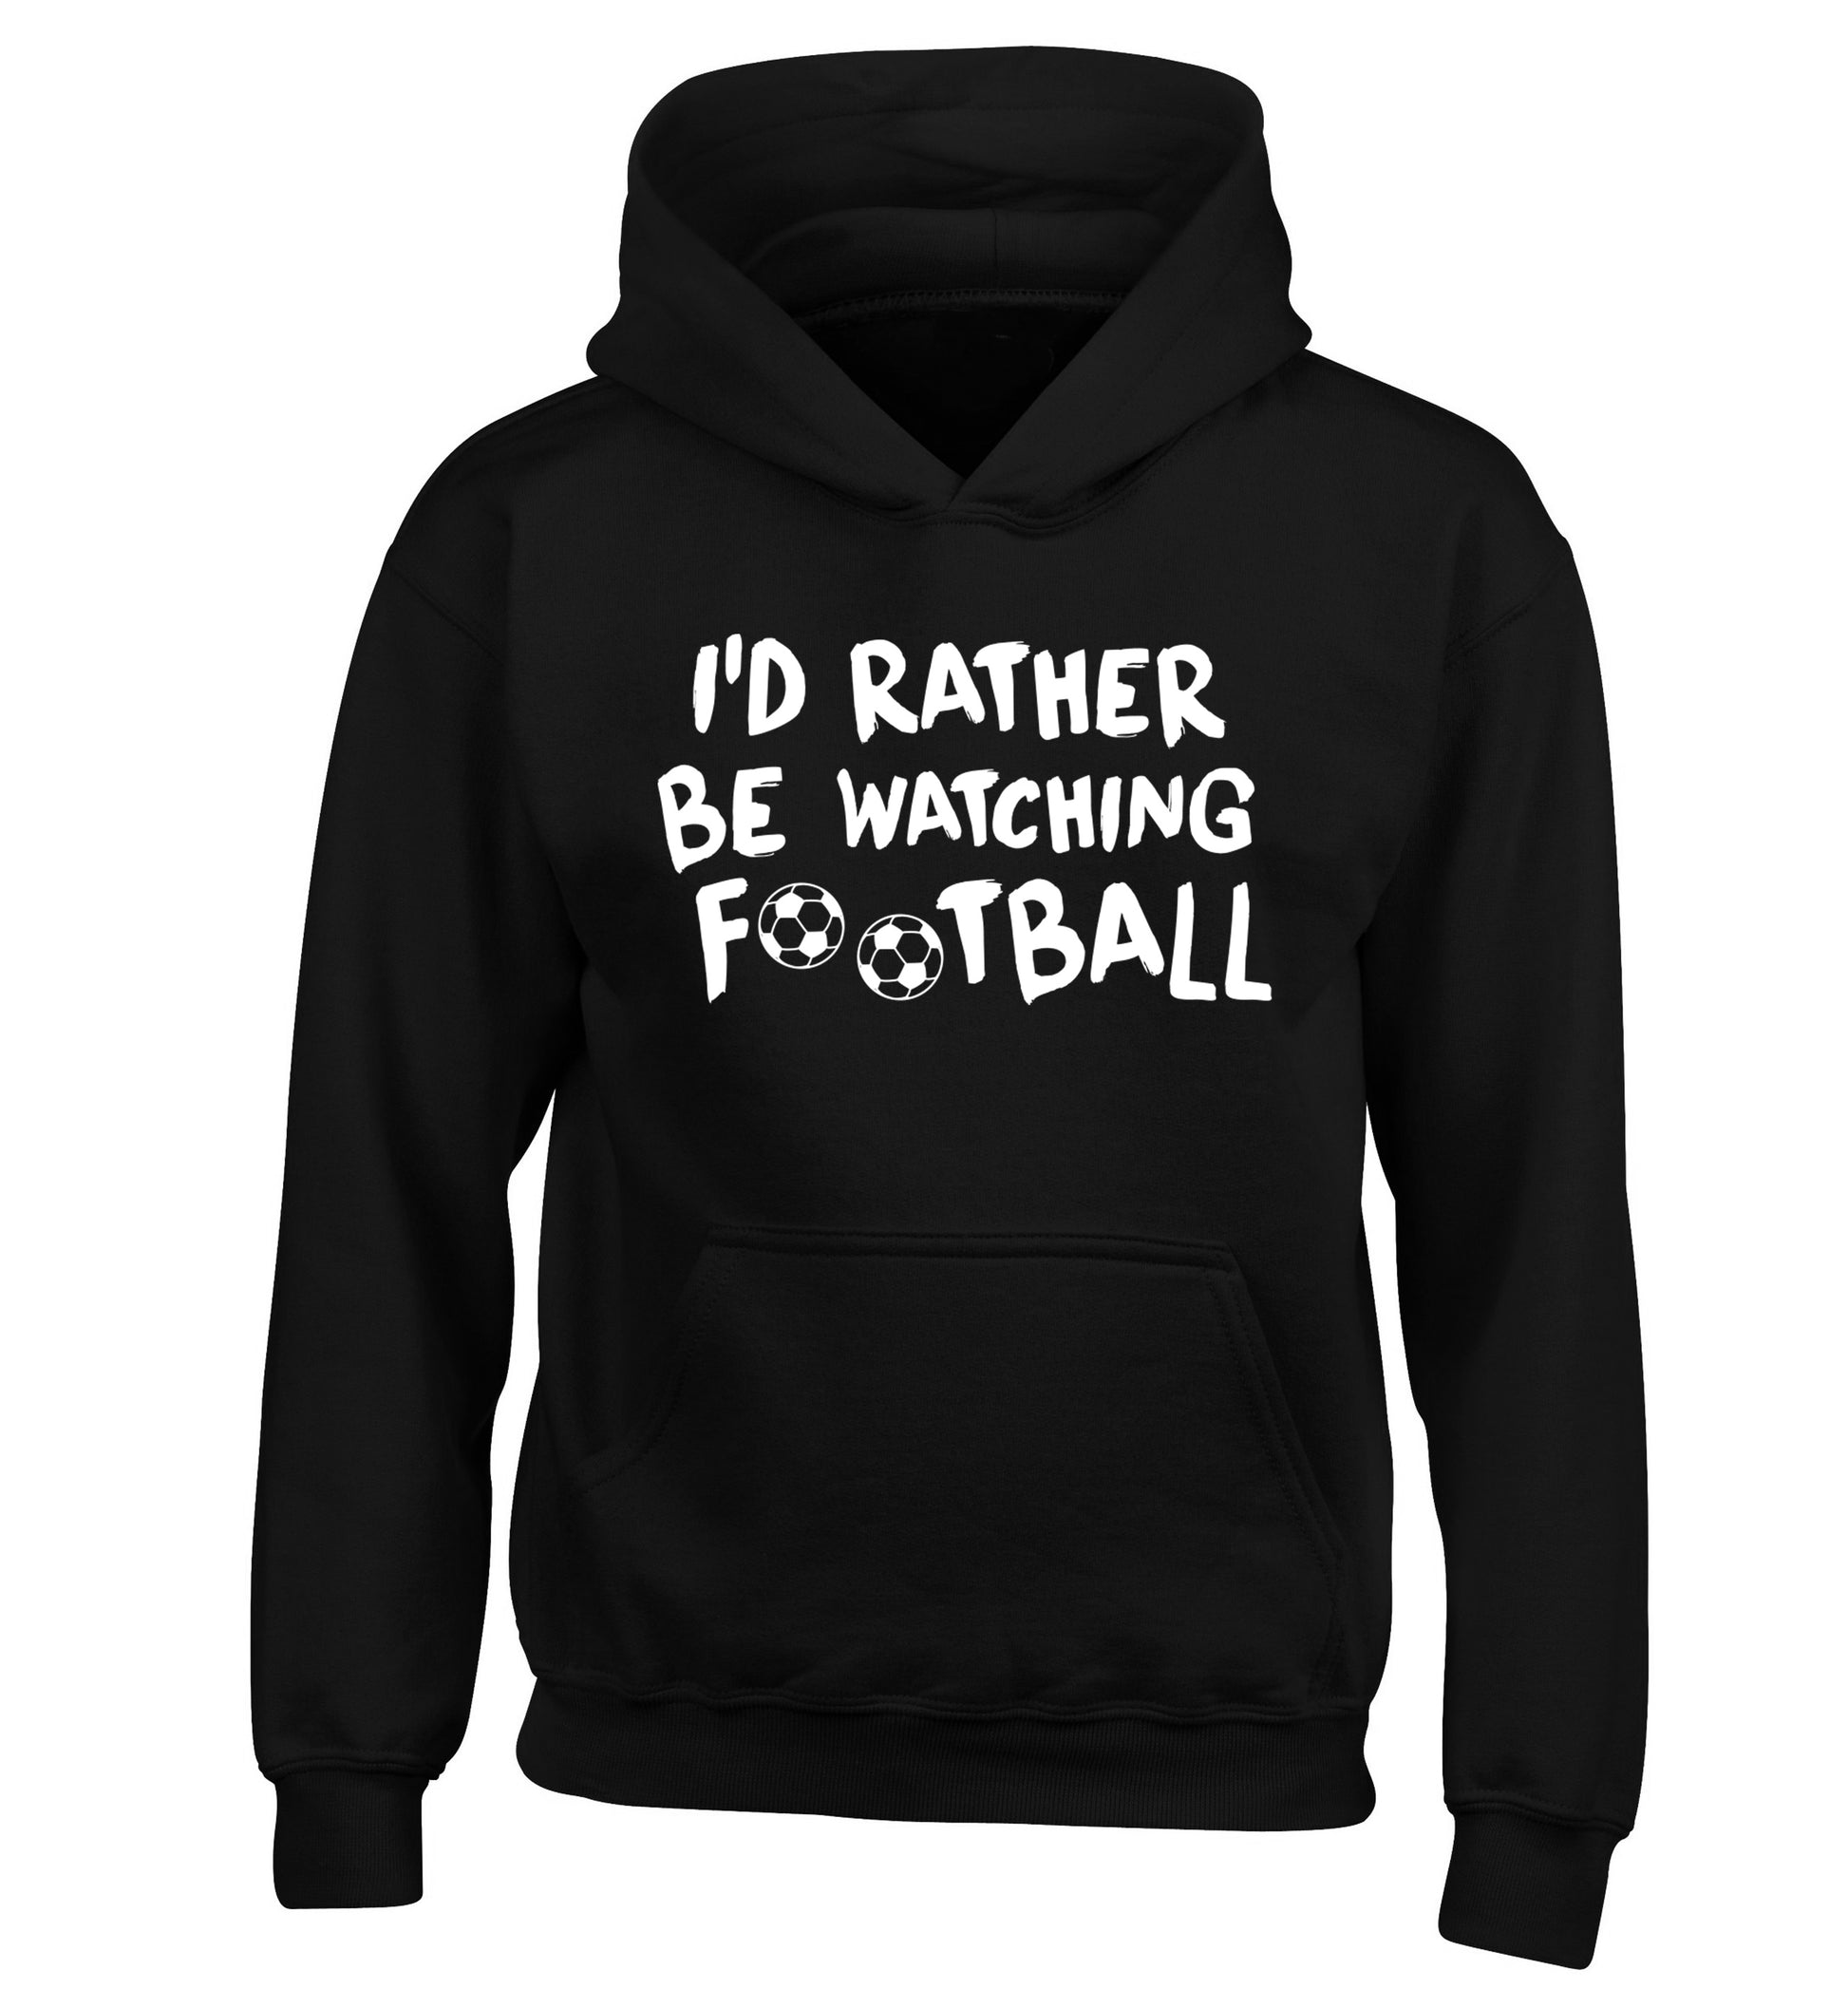 I'd rather be watching football children's black hoodie 12-14 Years